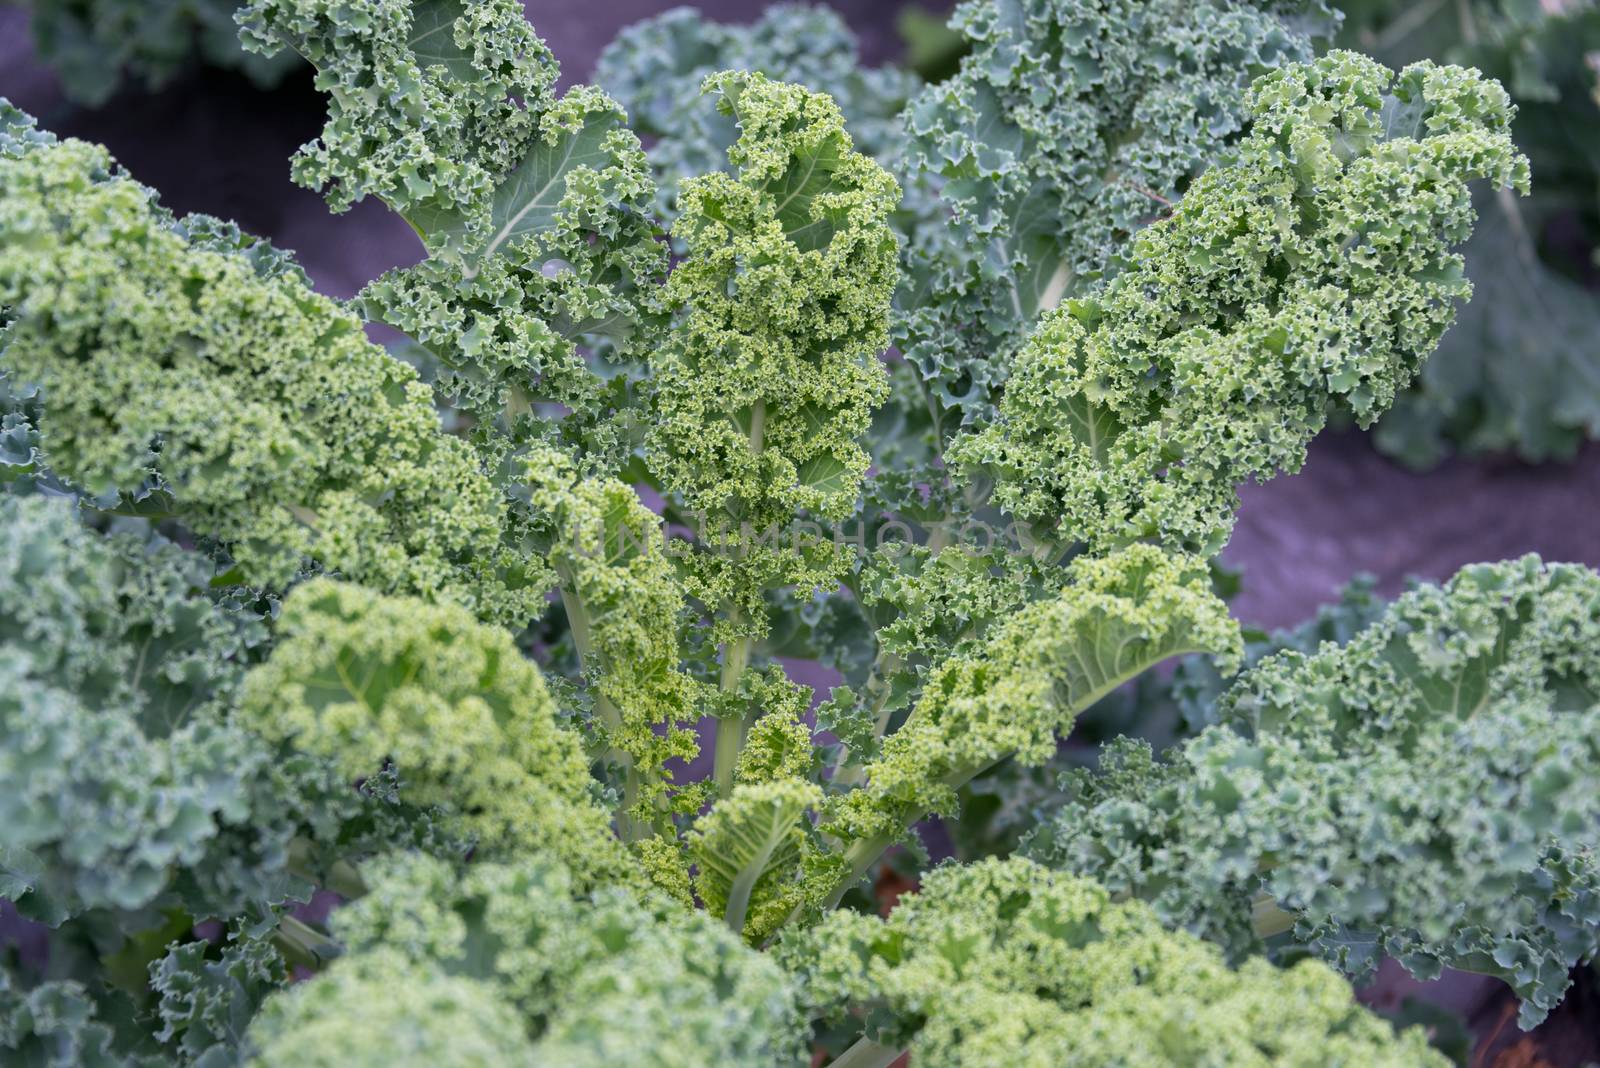 Kale Plant Growing in an Allotment by TimAwe